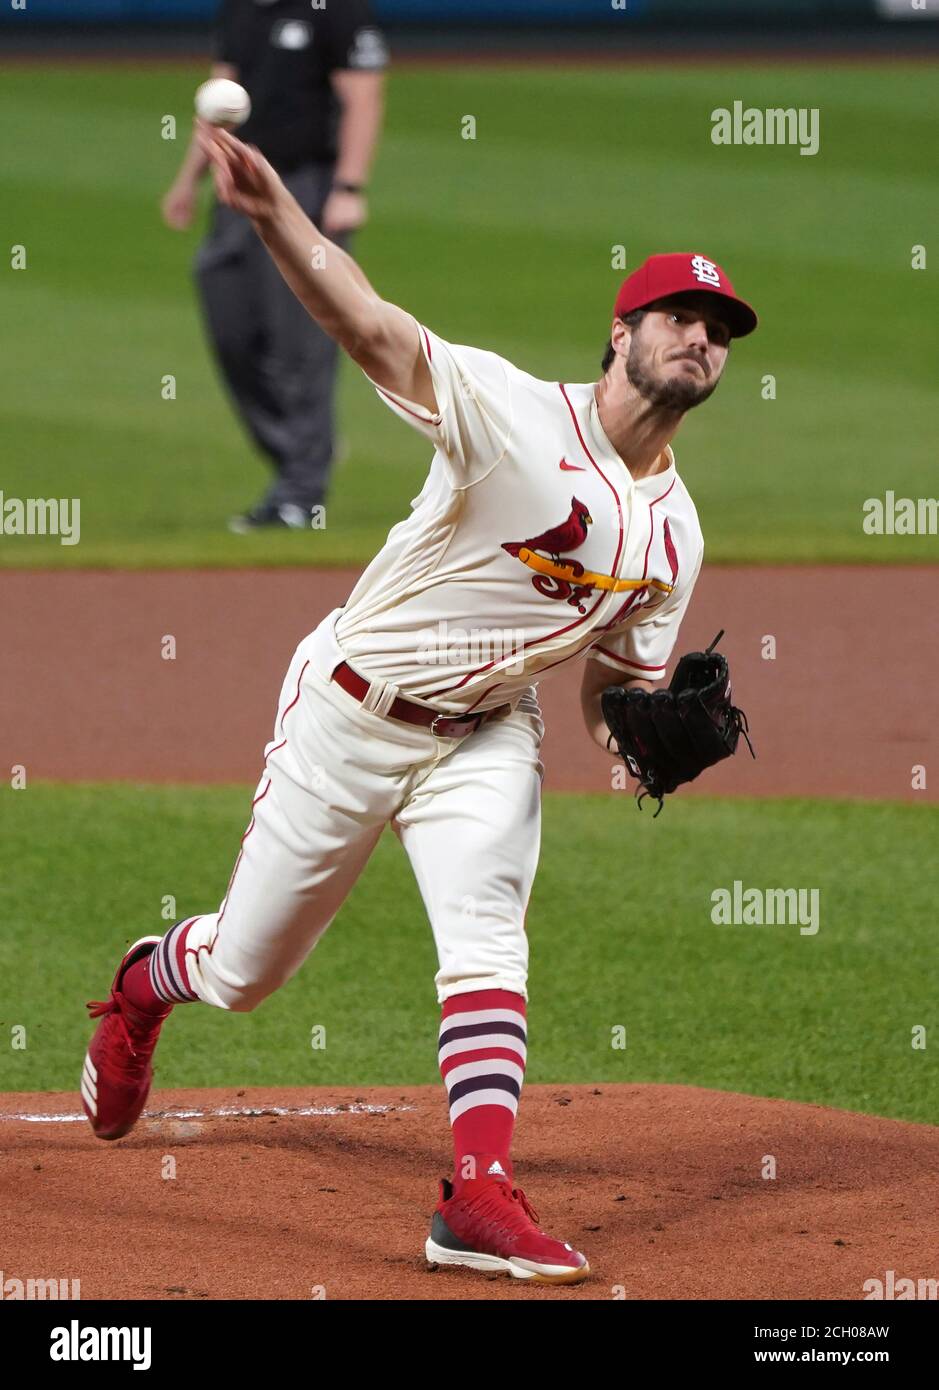 St. Louis, United States. 13th Sep, 2020. St. Louis Cardinals starting pitcher Dakota Hudson delivers a pitch to the Cincinnati Reds in the first inning at Busch Stadium in St. Louis on Saturday, September 12, 2020. Photo by Bill Greenblatt/UPI Credit: UPI/Alamy Live News Stock Photo